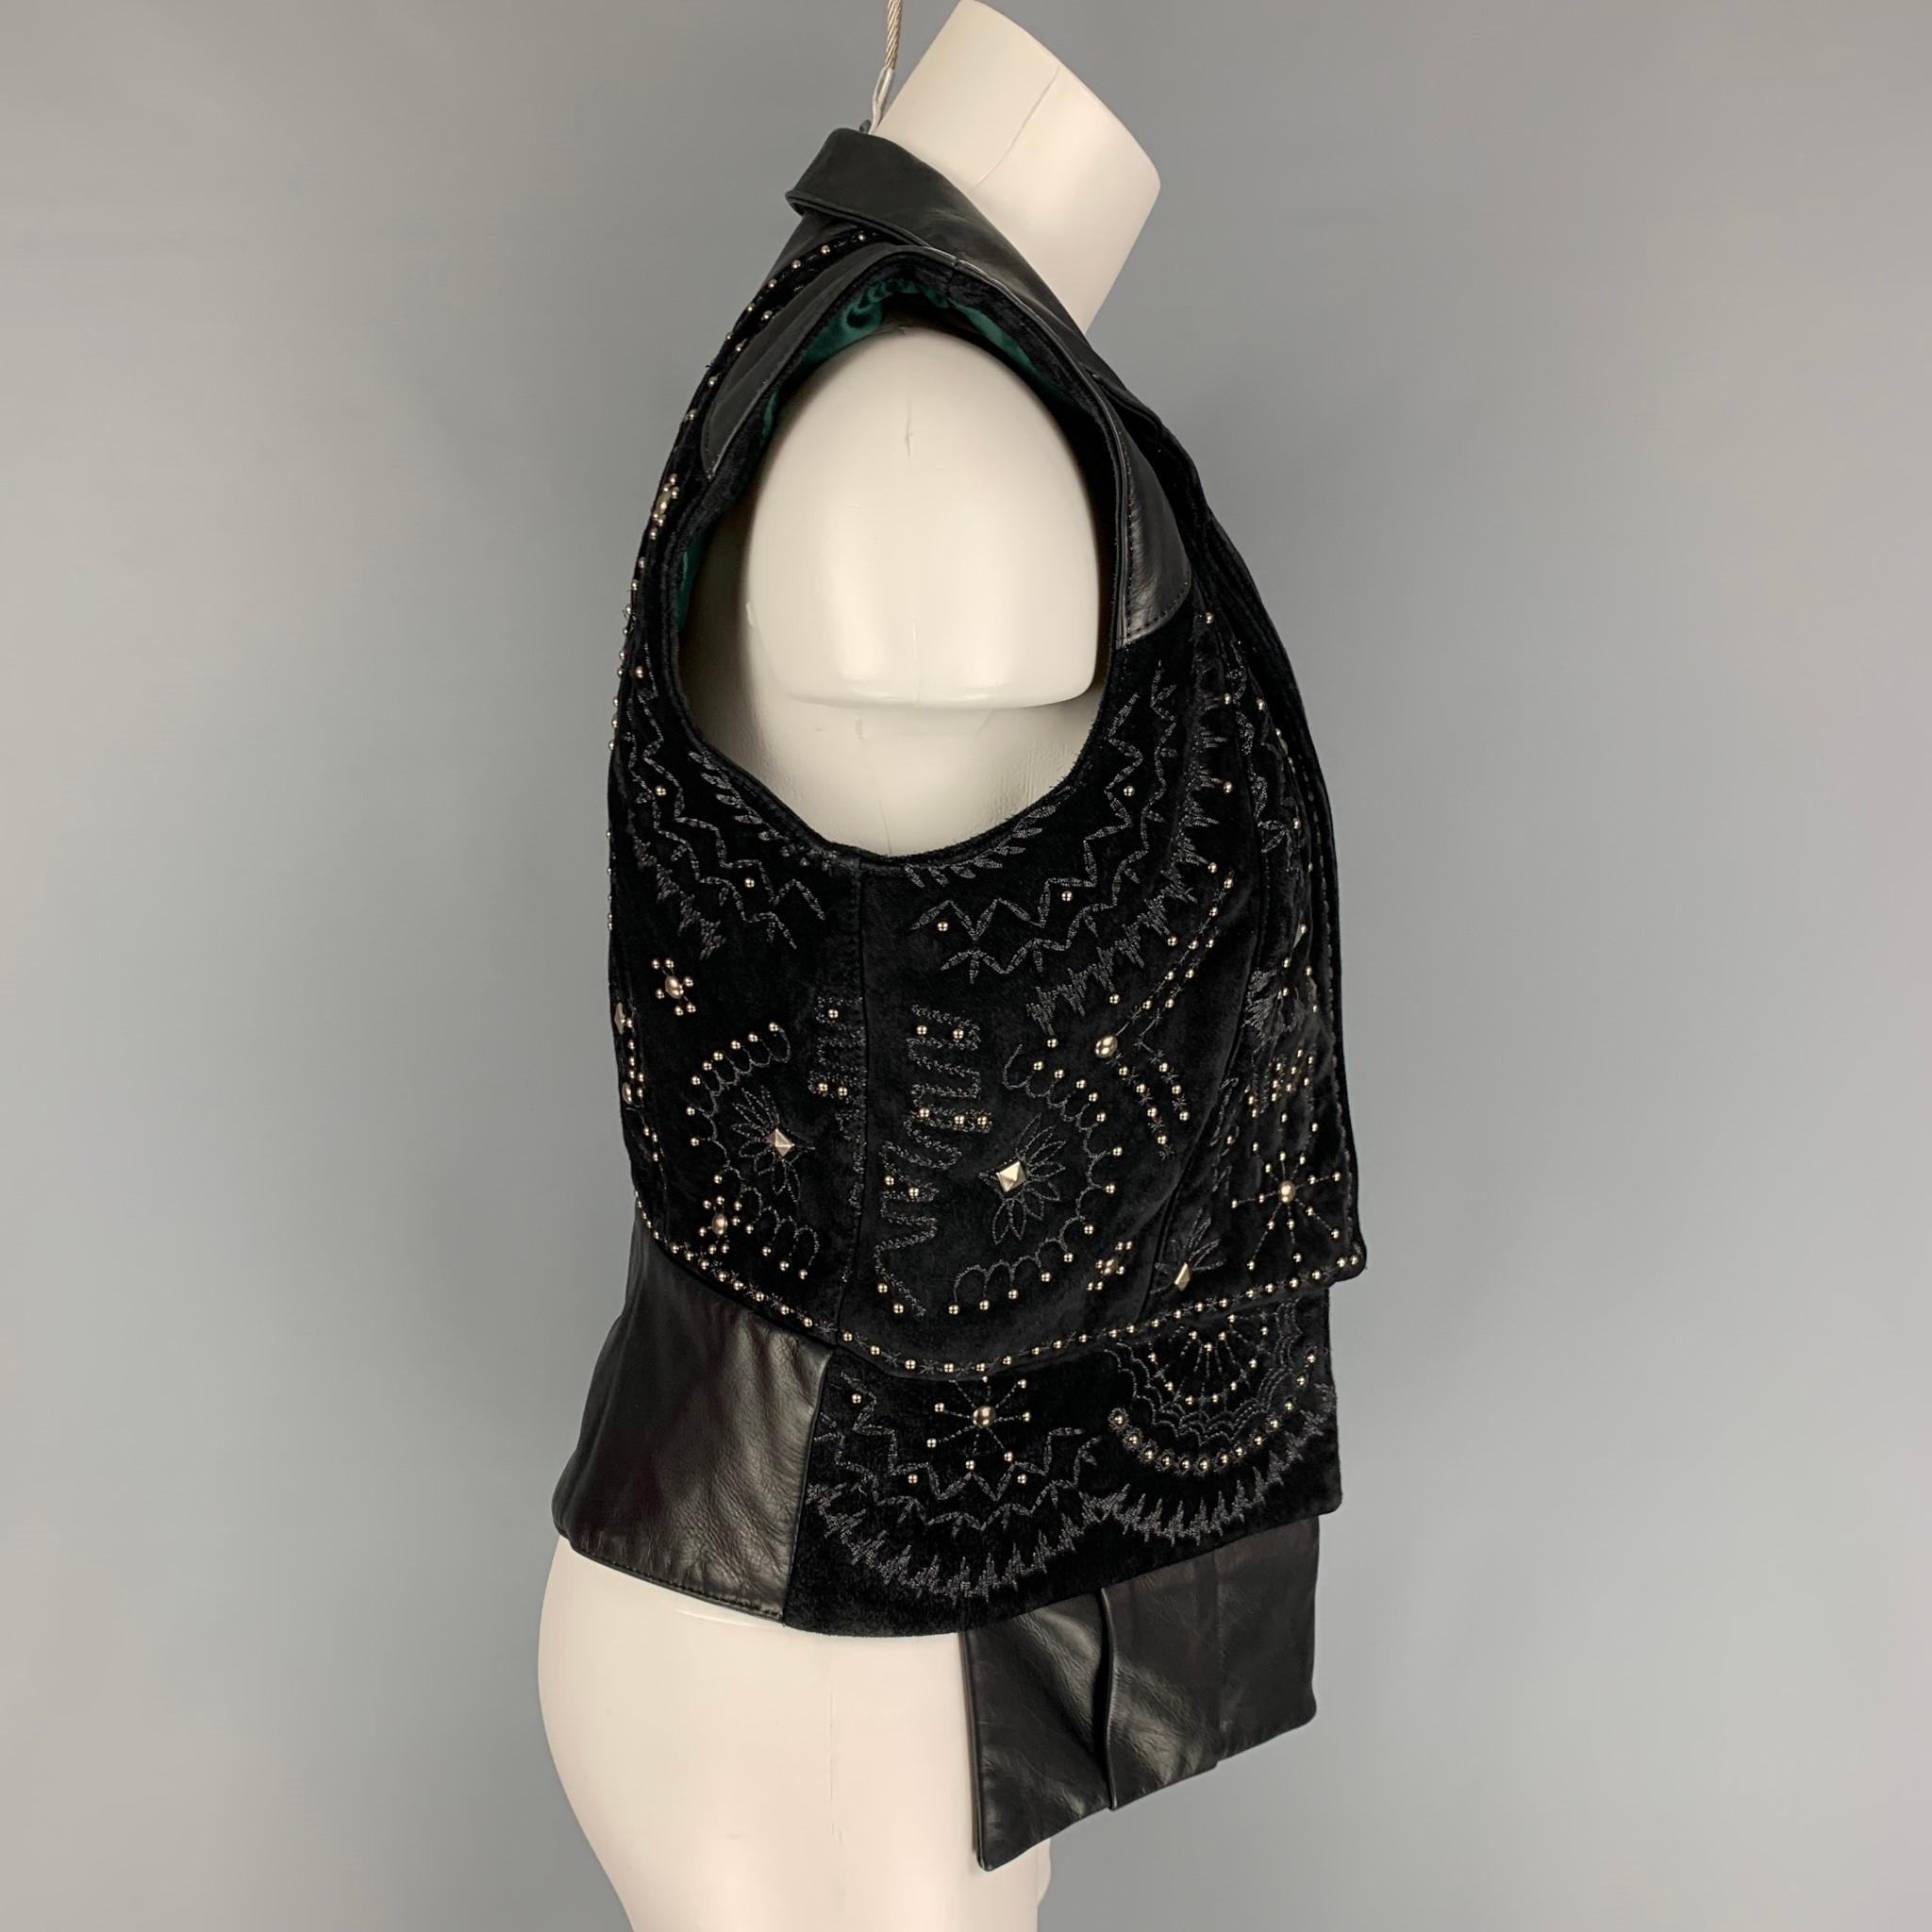 DONALD J PLINER vest comes in a black leather featuring hidden panel pocket details, studded embellishments, spread collar, embroidery, and a hidden placket closure. 

Very Good Pre-Owned Condition.
Marked: SML

Measurements:

Shoulder: 15 in.
Bust: